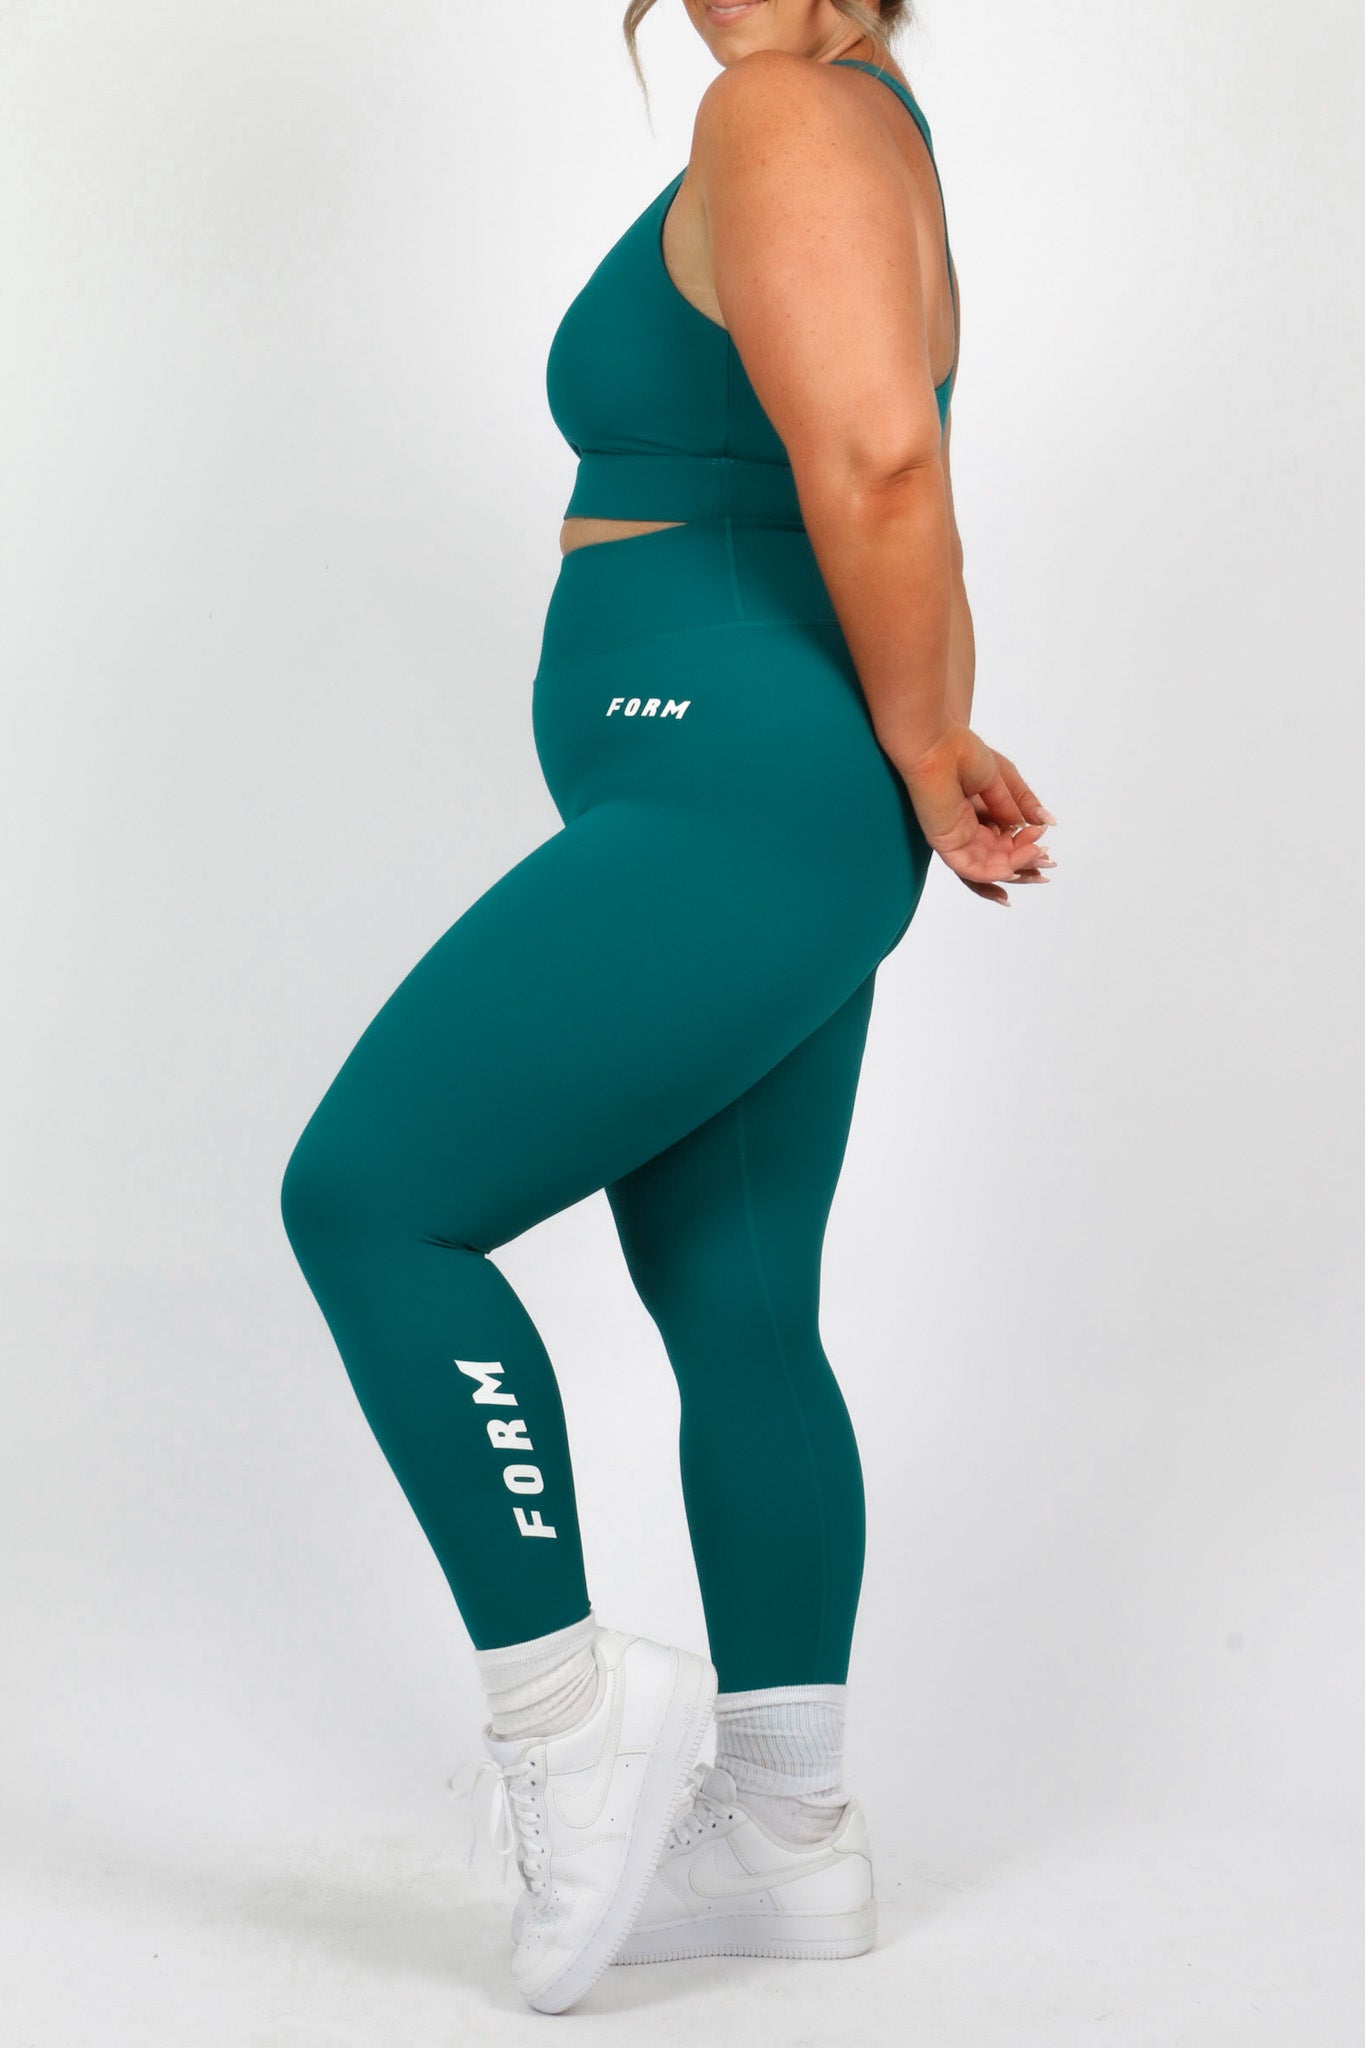 FORM BASE TIGHT 7/8 TEAL – FAYT The Label